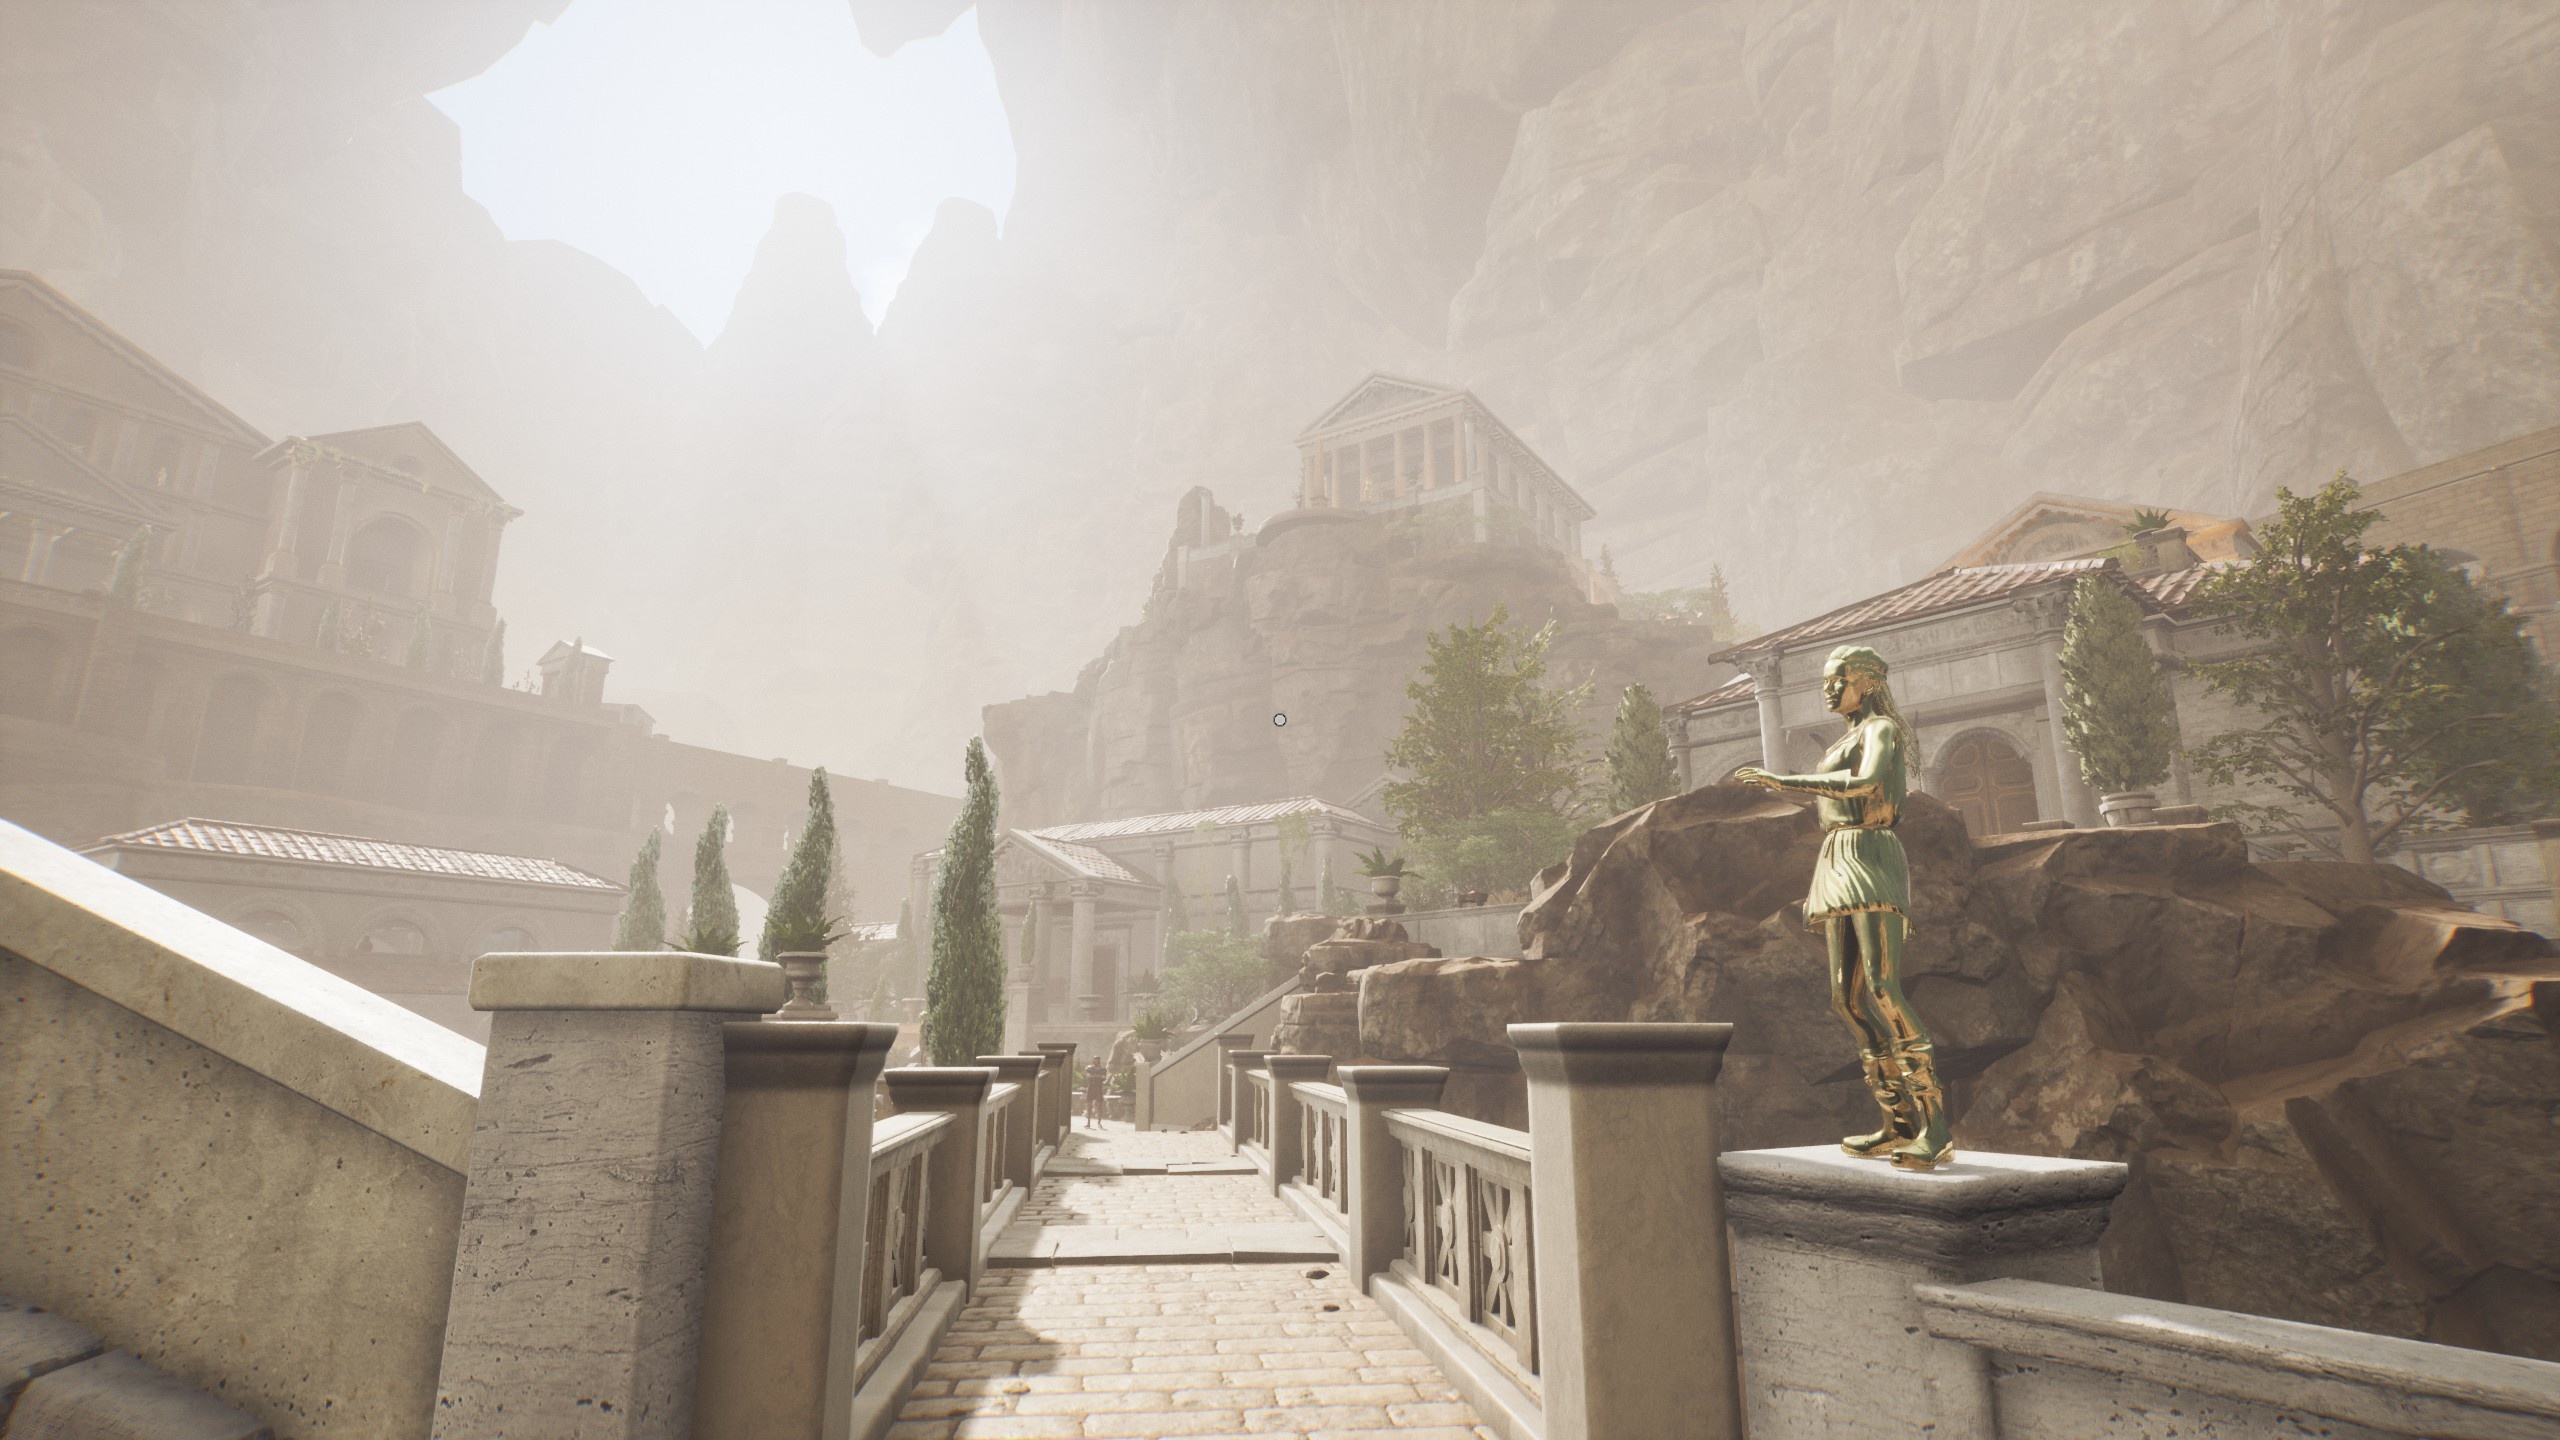 (A relatively small Roman city located in a hidden crevice is one of the best Open Worlds I've ever explored.)